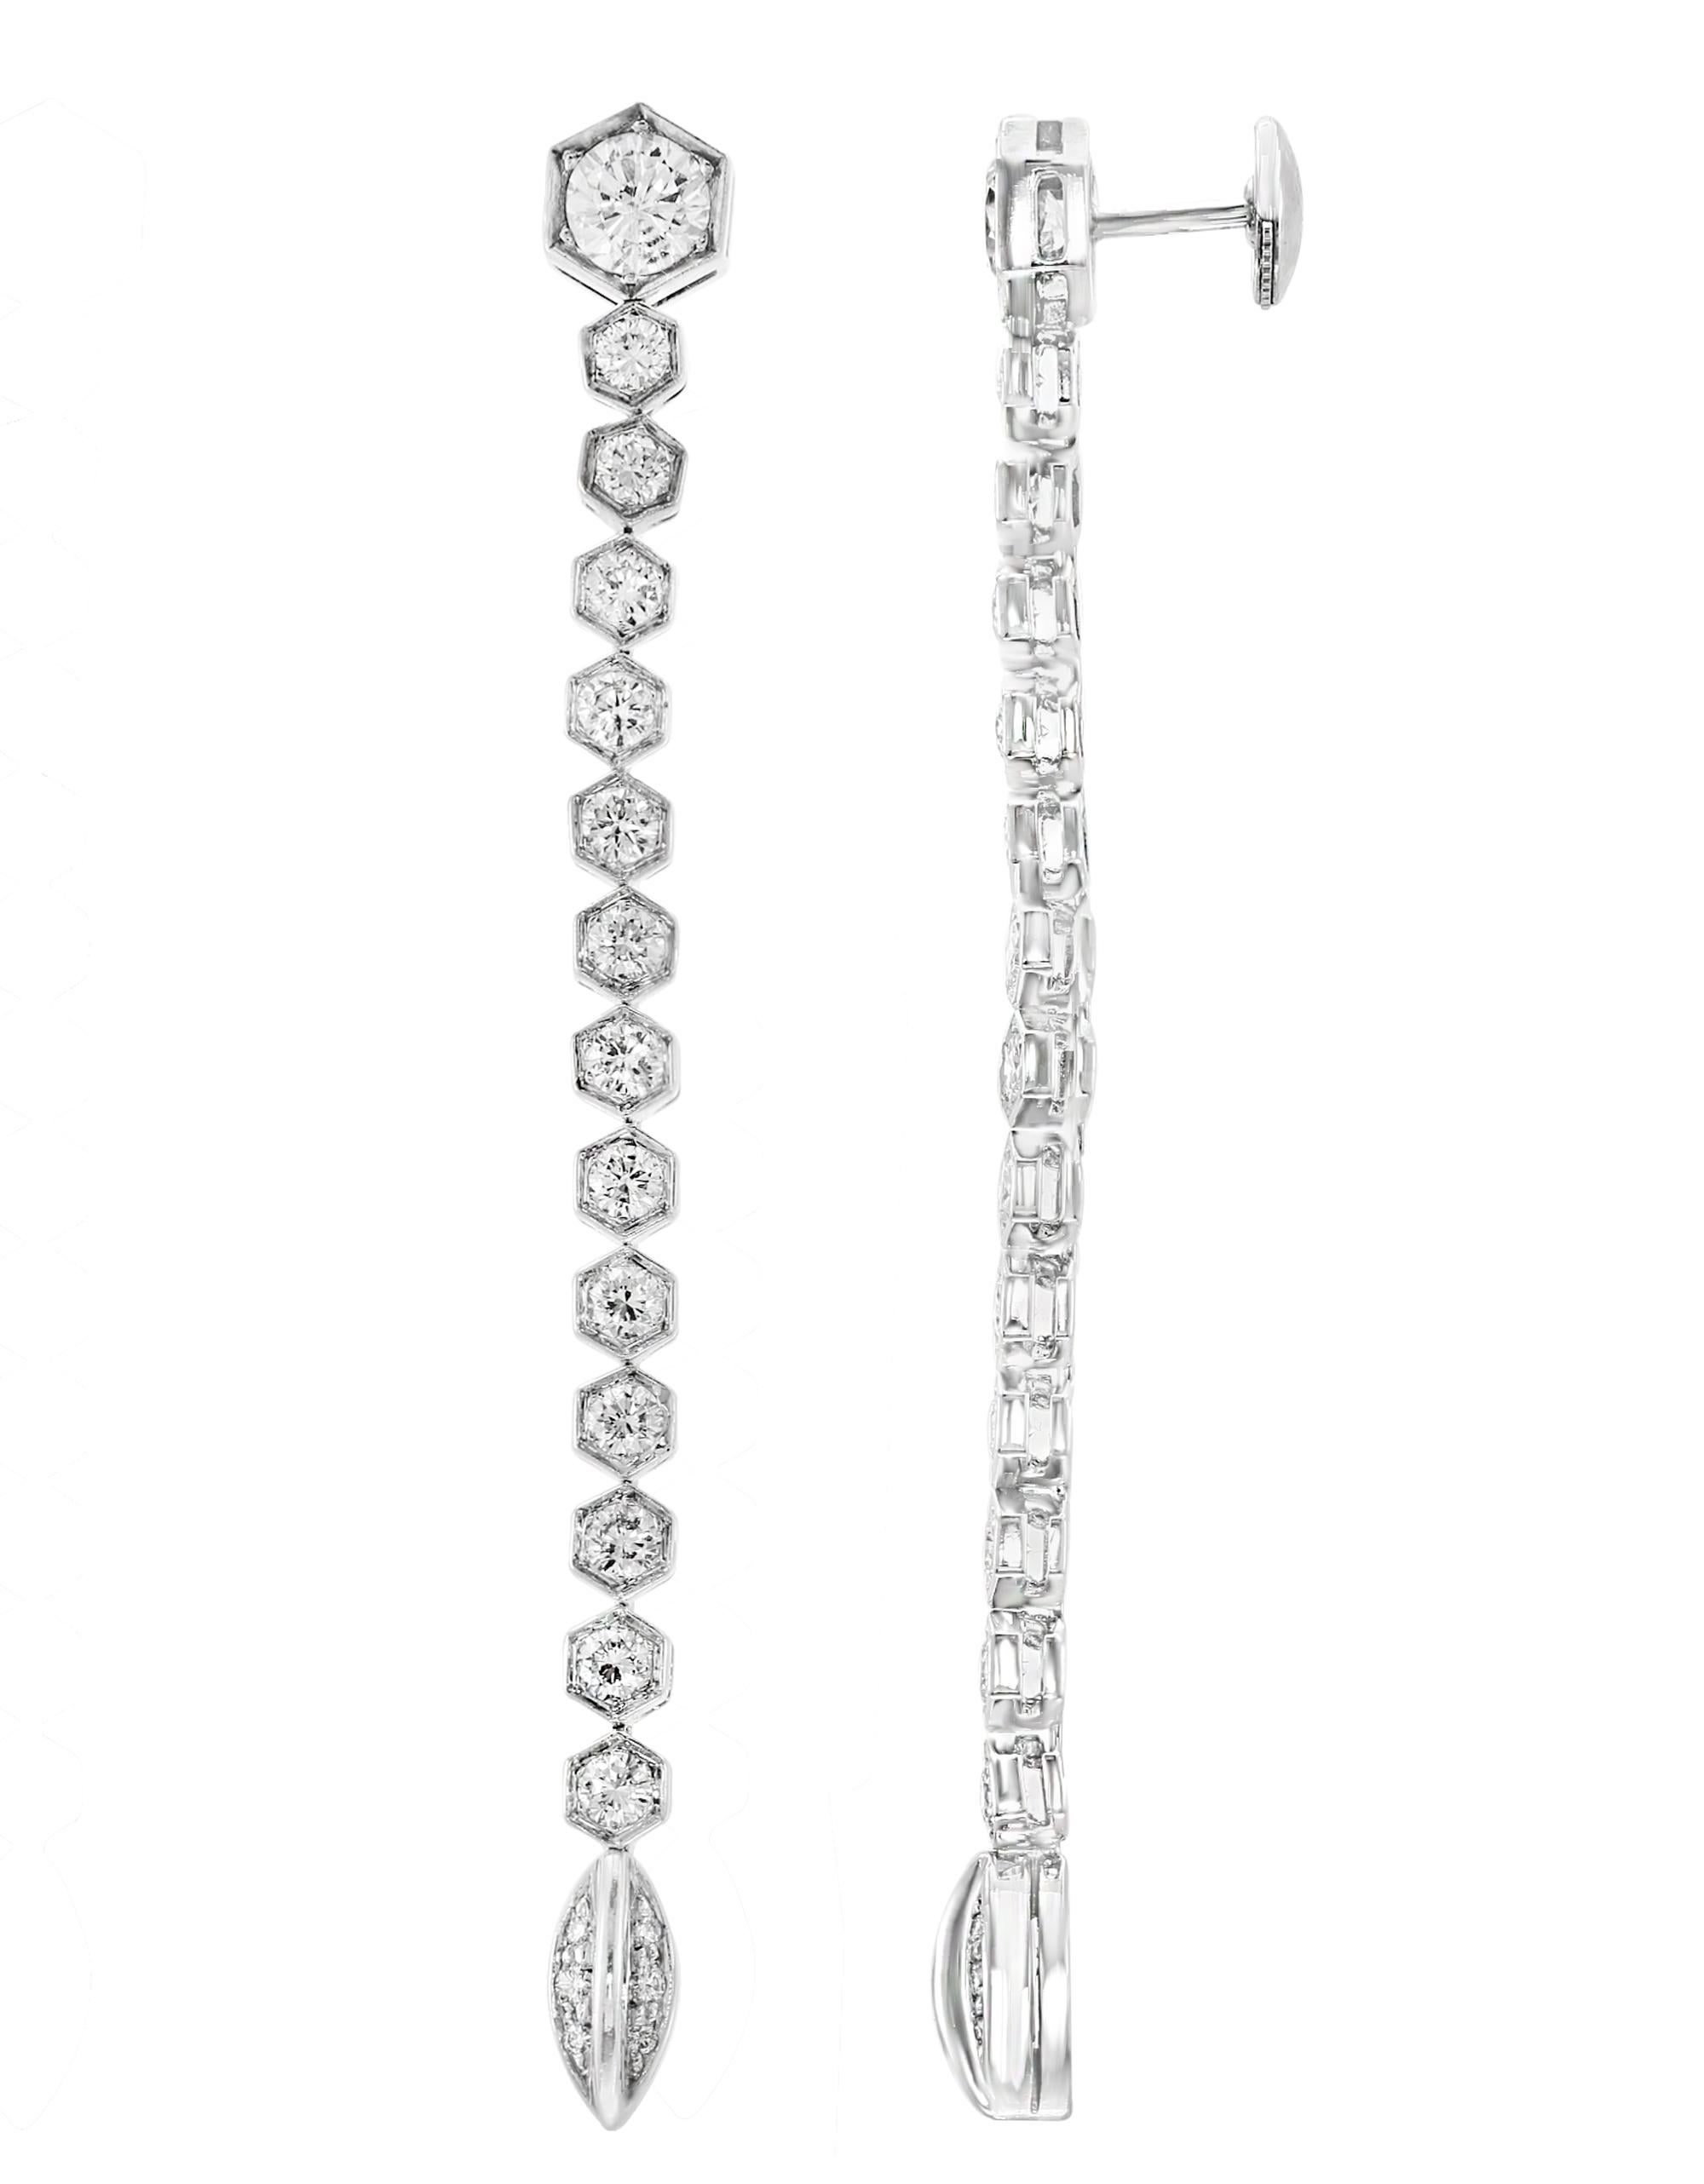 18 Karat white gold  necklace  and Earring suite.
 Round brilliant cut diamonds set in 4 rows  in the necklace.
The Necklace is made with round  diamonds with a total 12 carat   F-G color, VS1, VS2 clarity. Matching line Earring follows the same